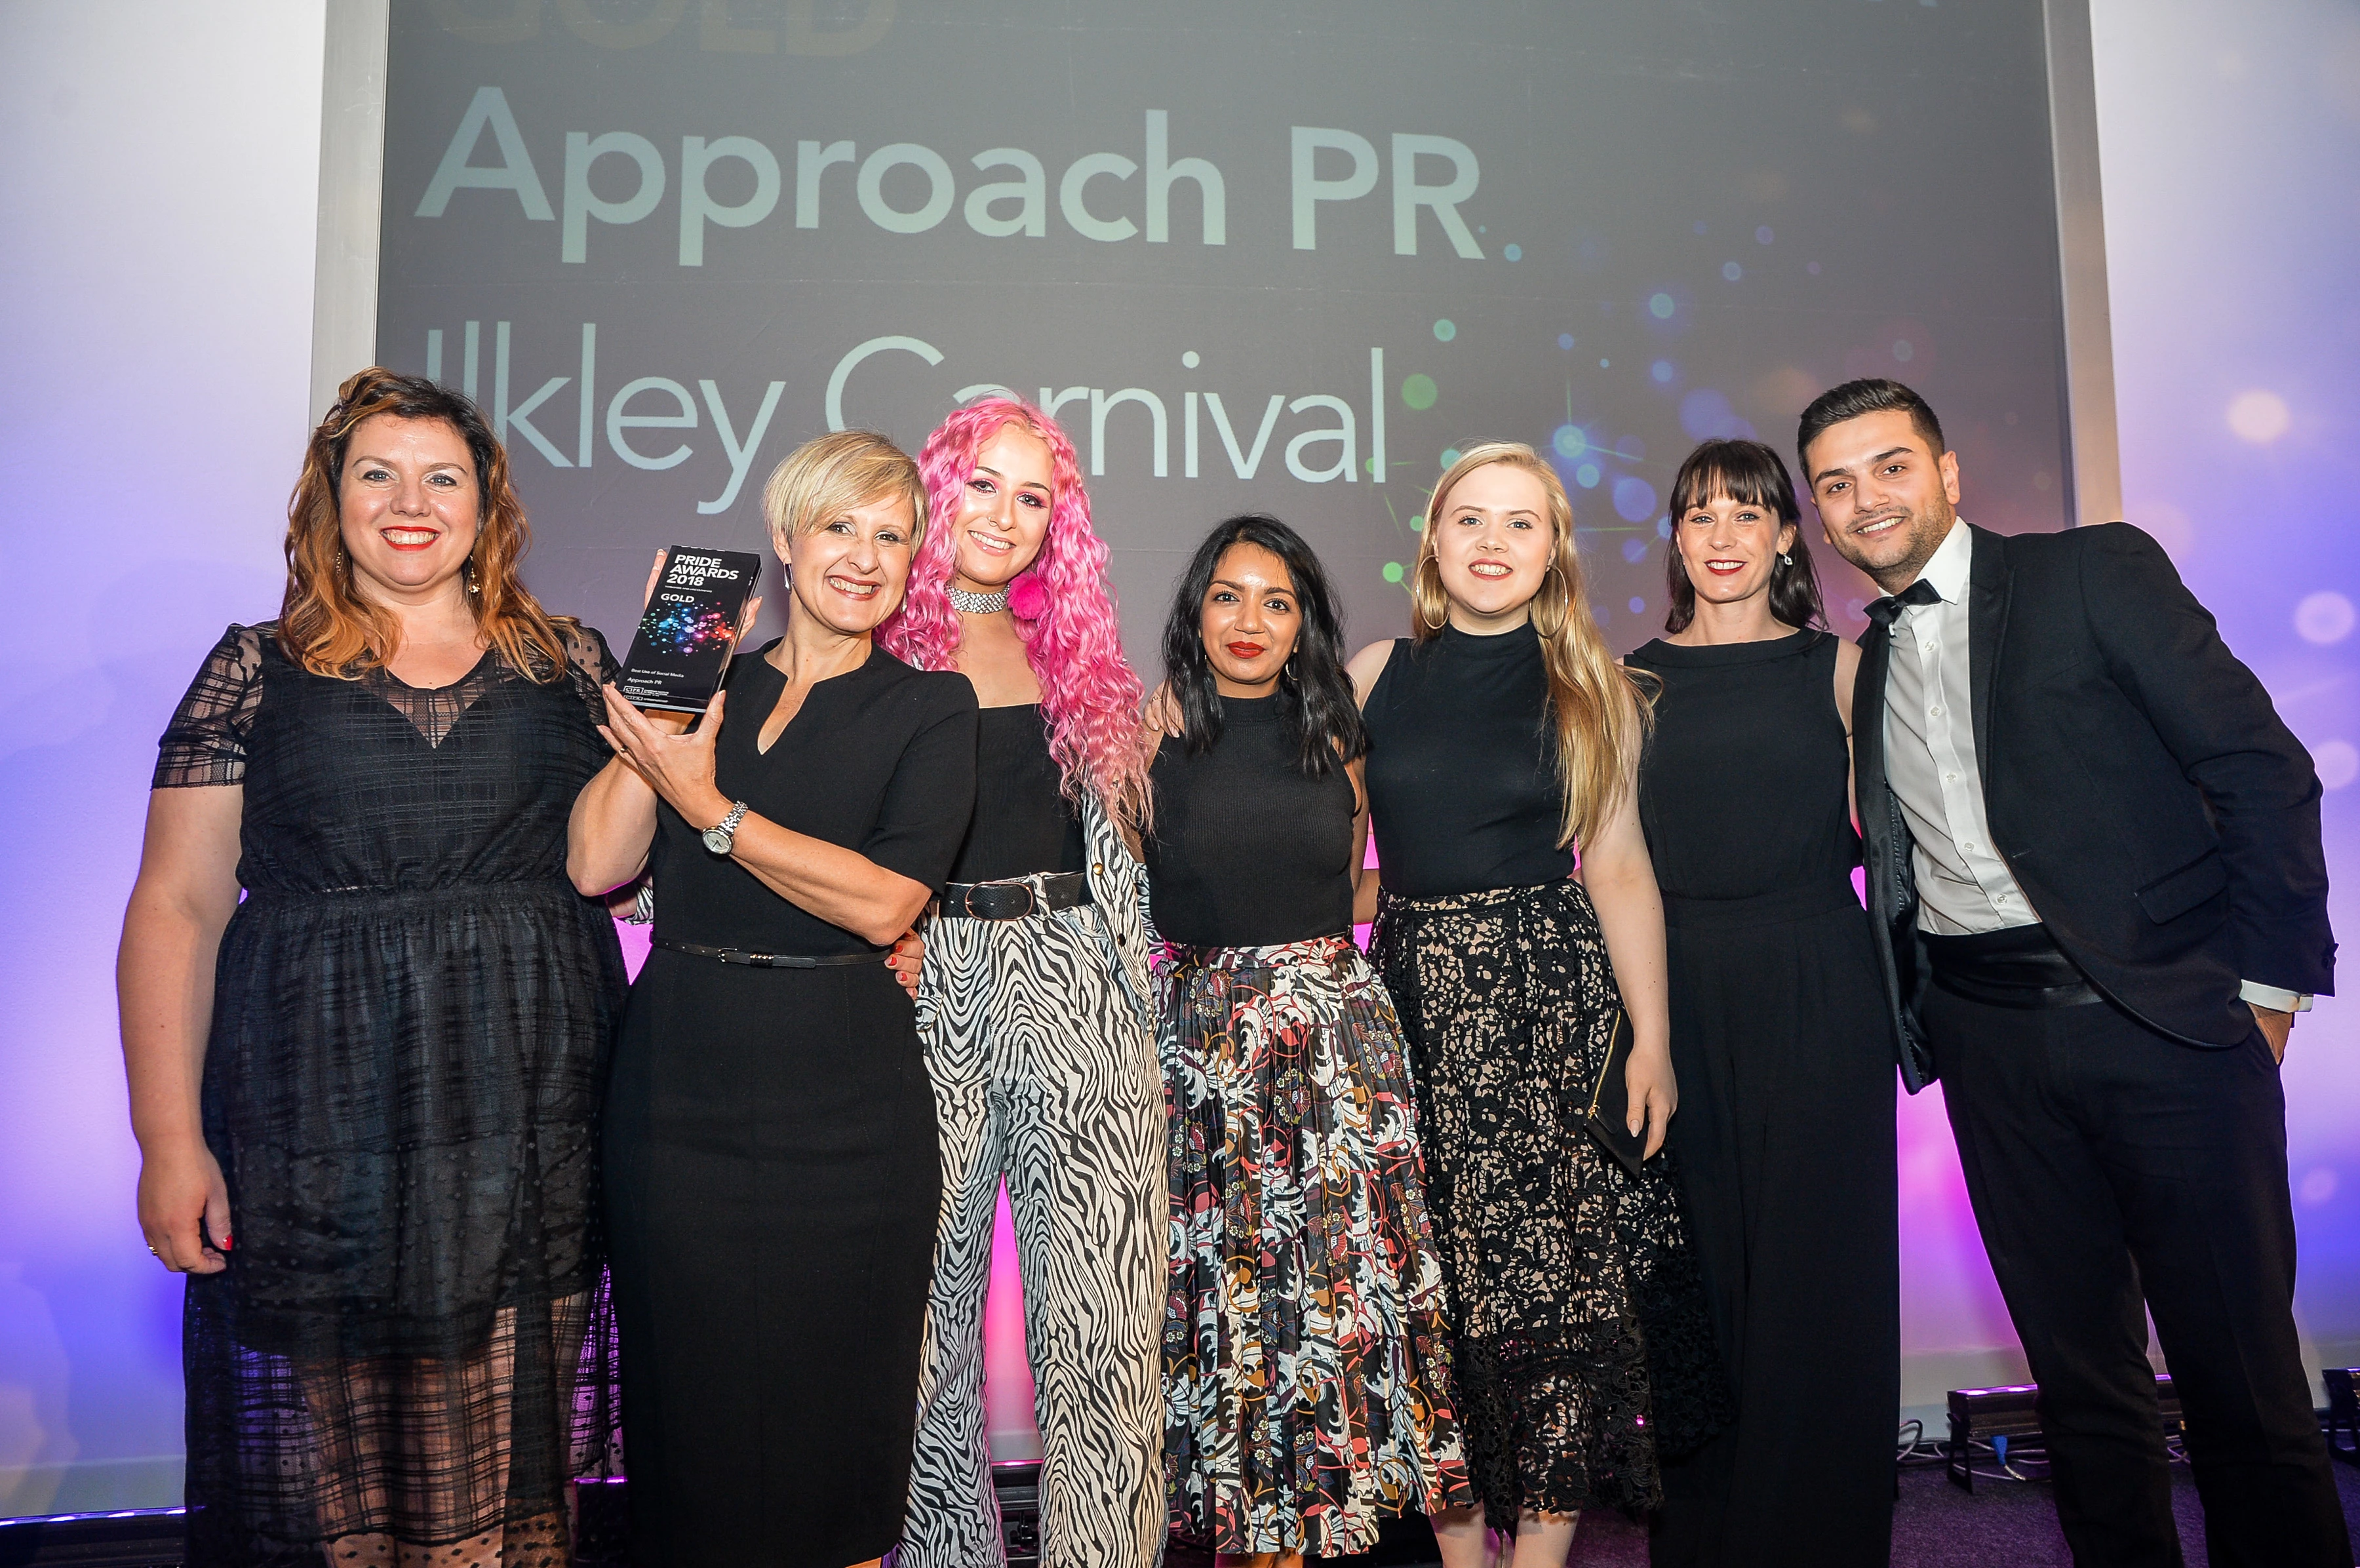 L-R Approach PR's Helen Elson, MD of Approach PR Suzanne Watson, Betty Adams, Anisha Mistry, Shona England-Lees, Sarah Kroon and a representative from sponsor Kantar Media